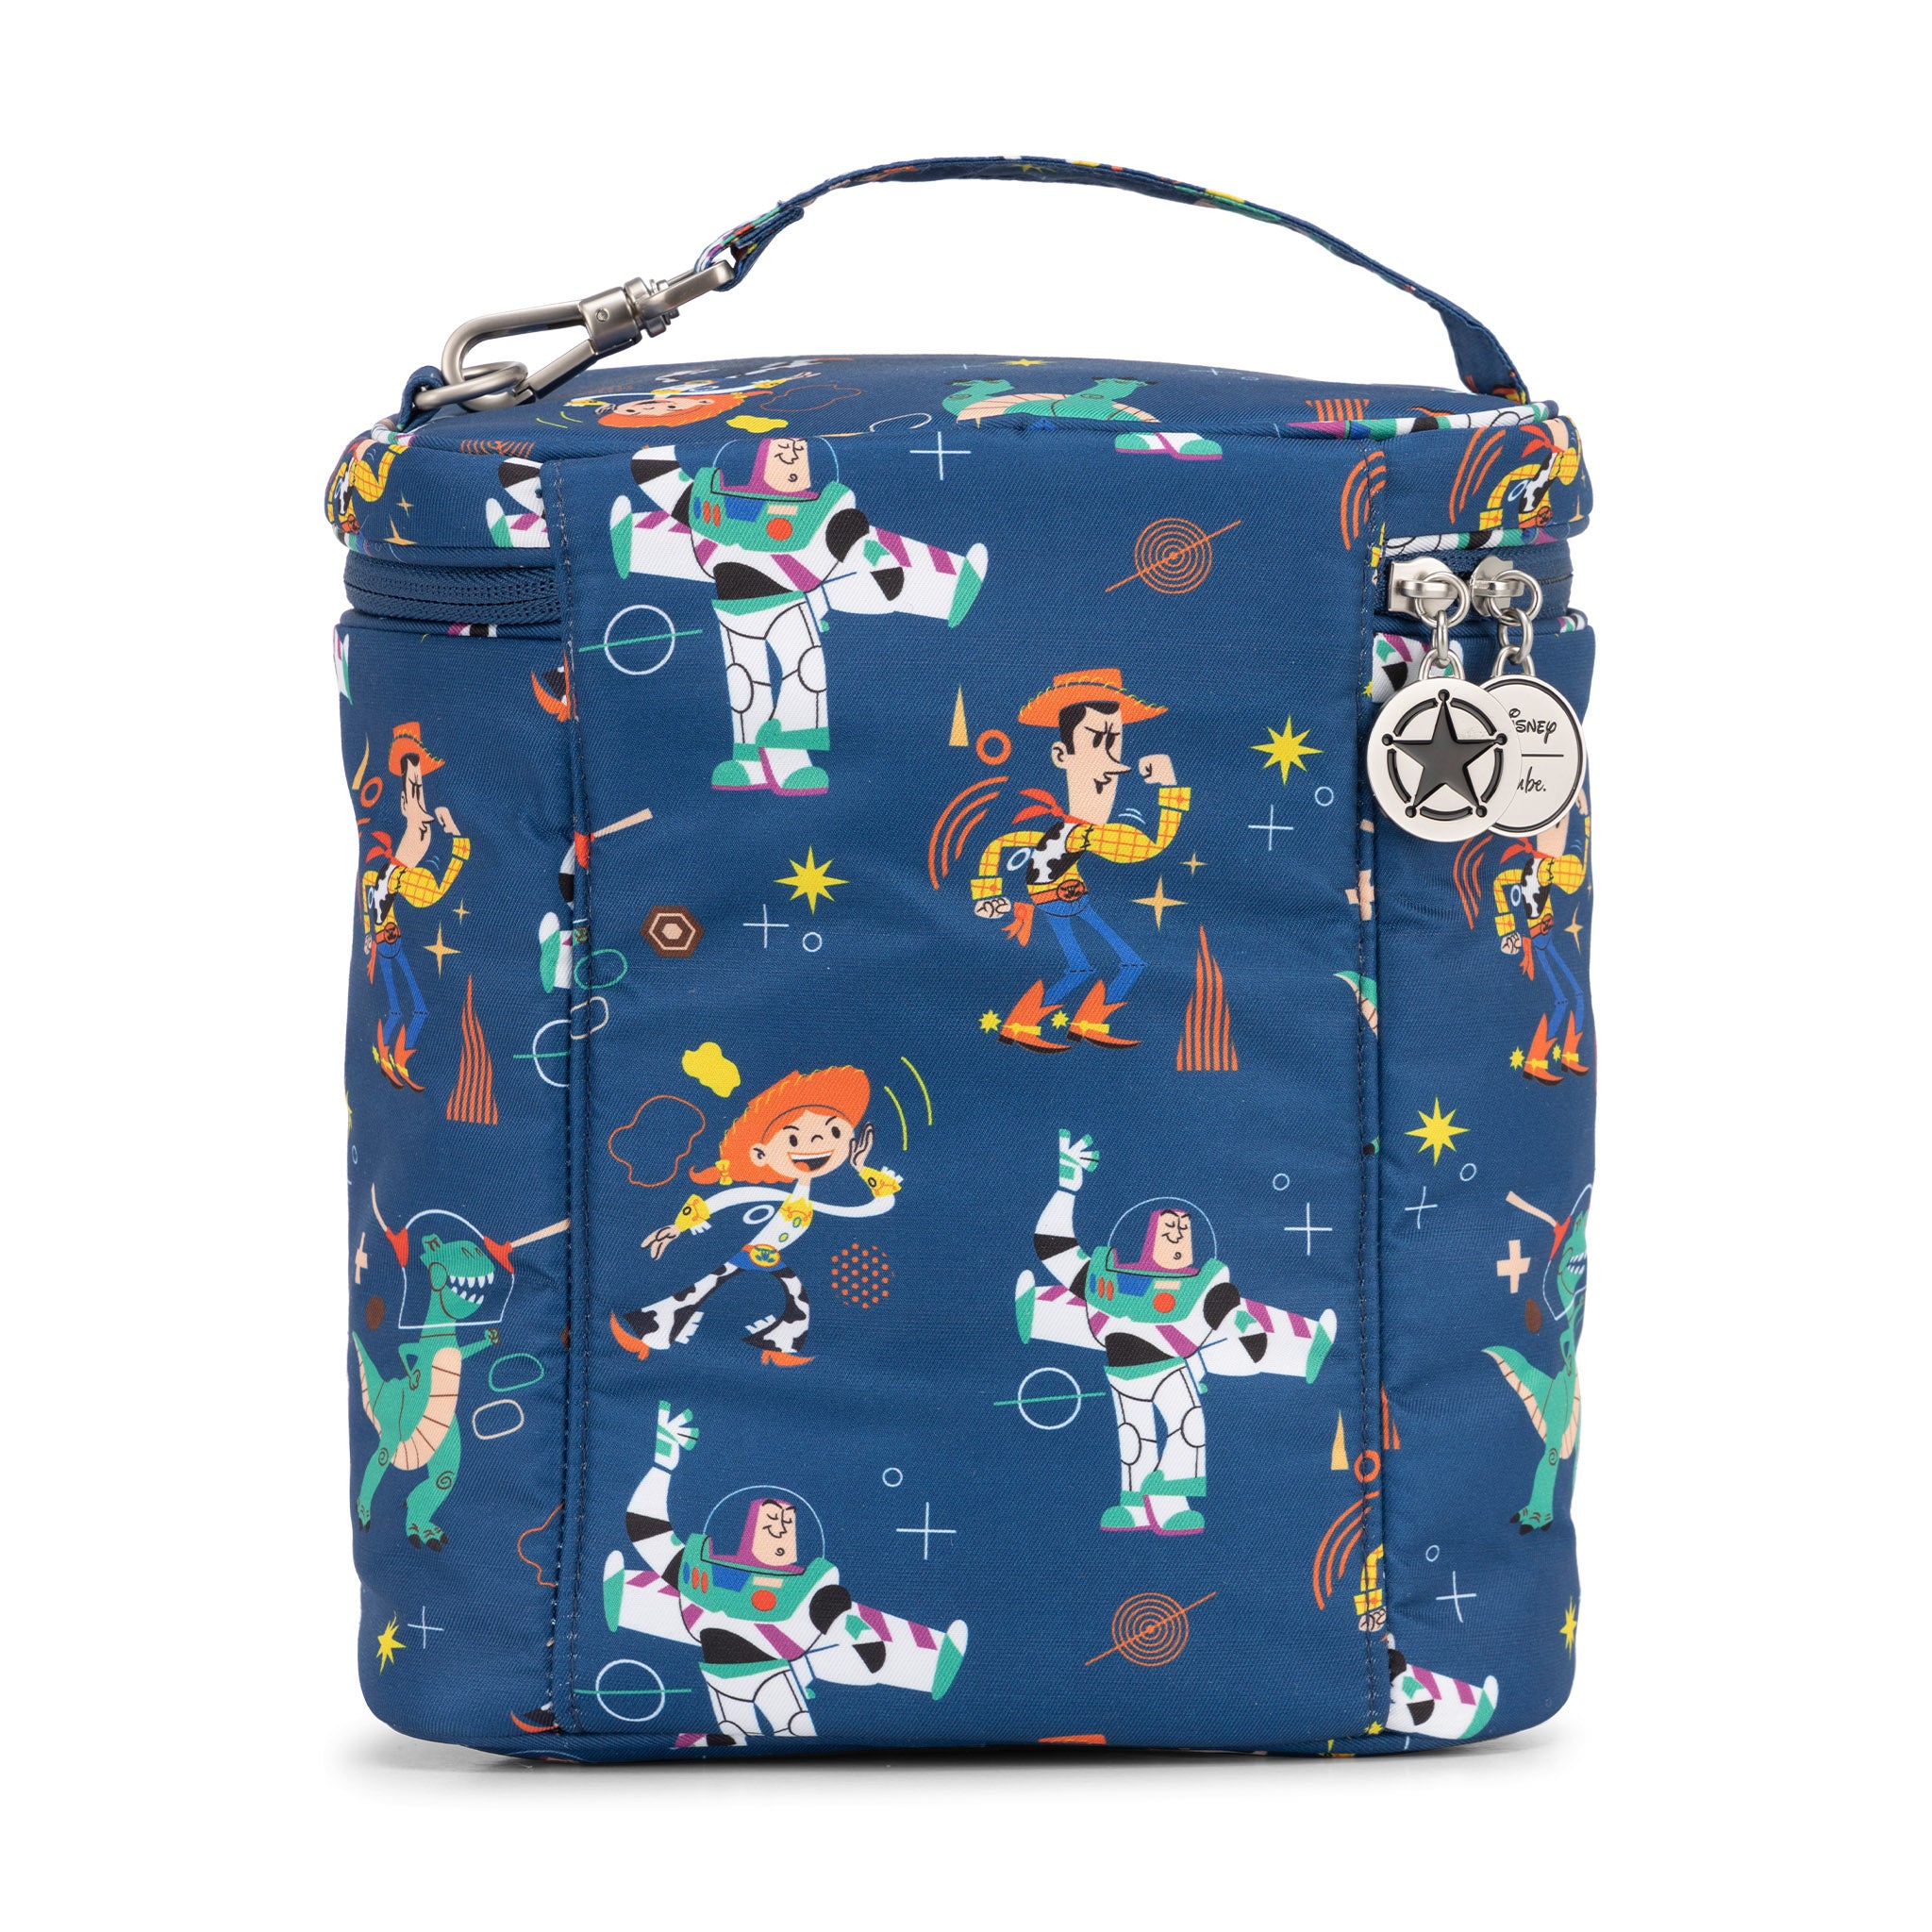 Jujube Disney Pixar Fuel Cell insulated bag back view